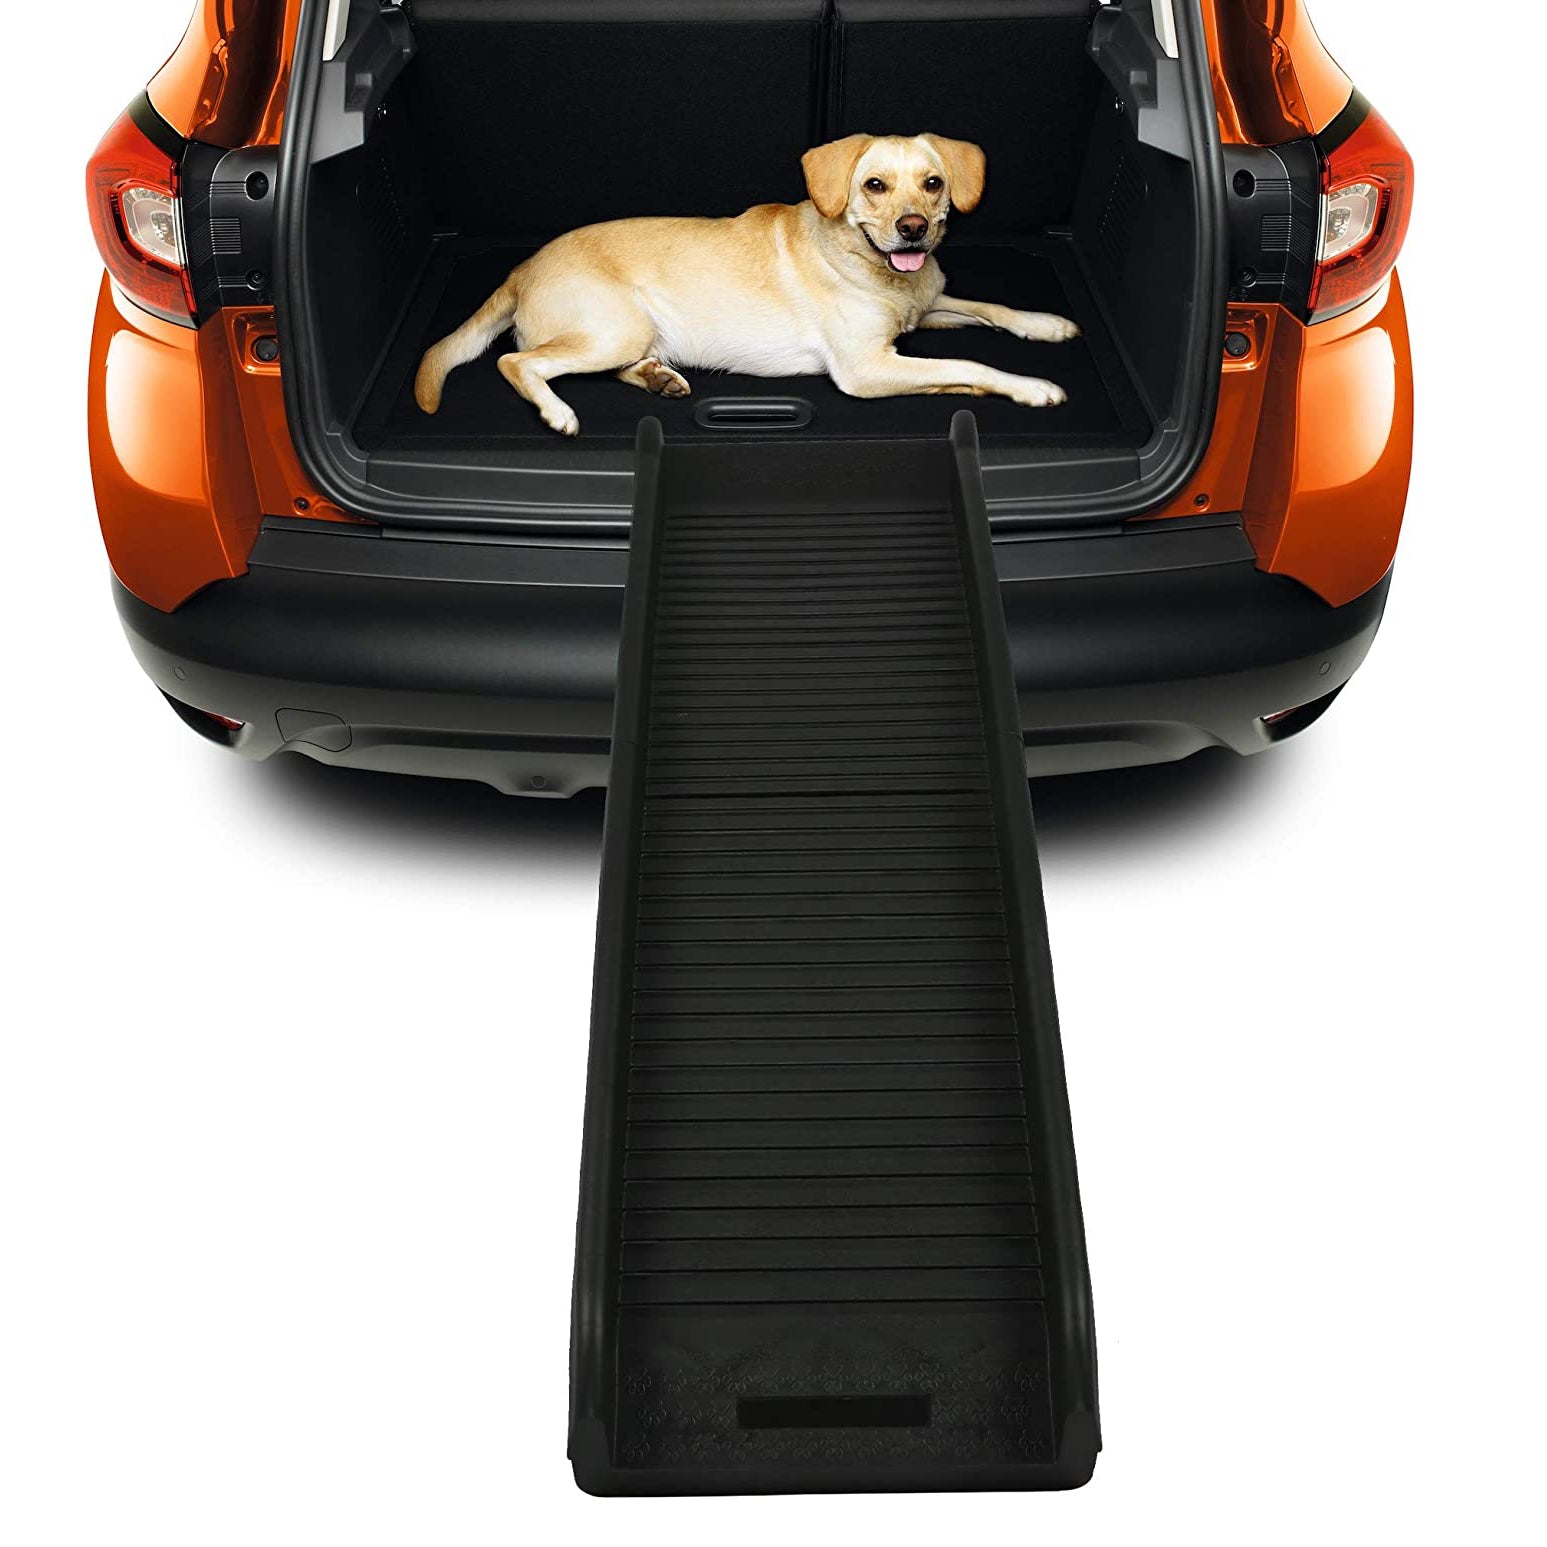 60"L Folding Portable Pet Ramp for Car, Gear Slip-Resistant Surface Safety Dog Ramp, Supports Up to 165 Lb